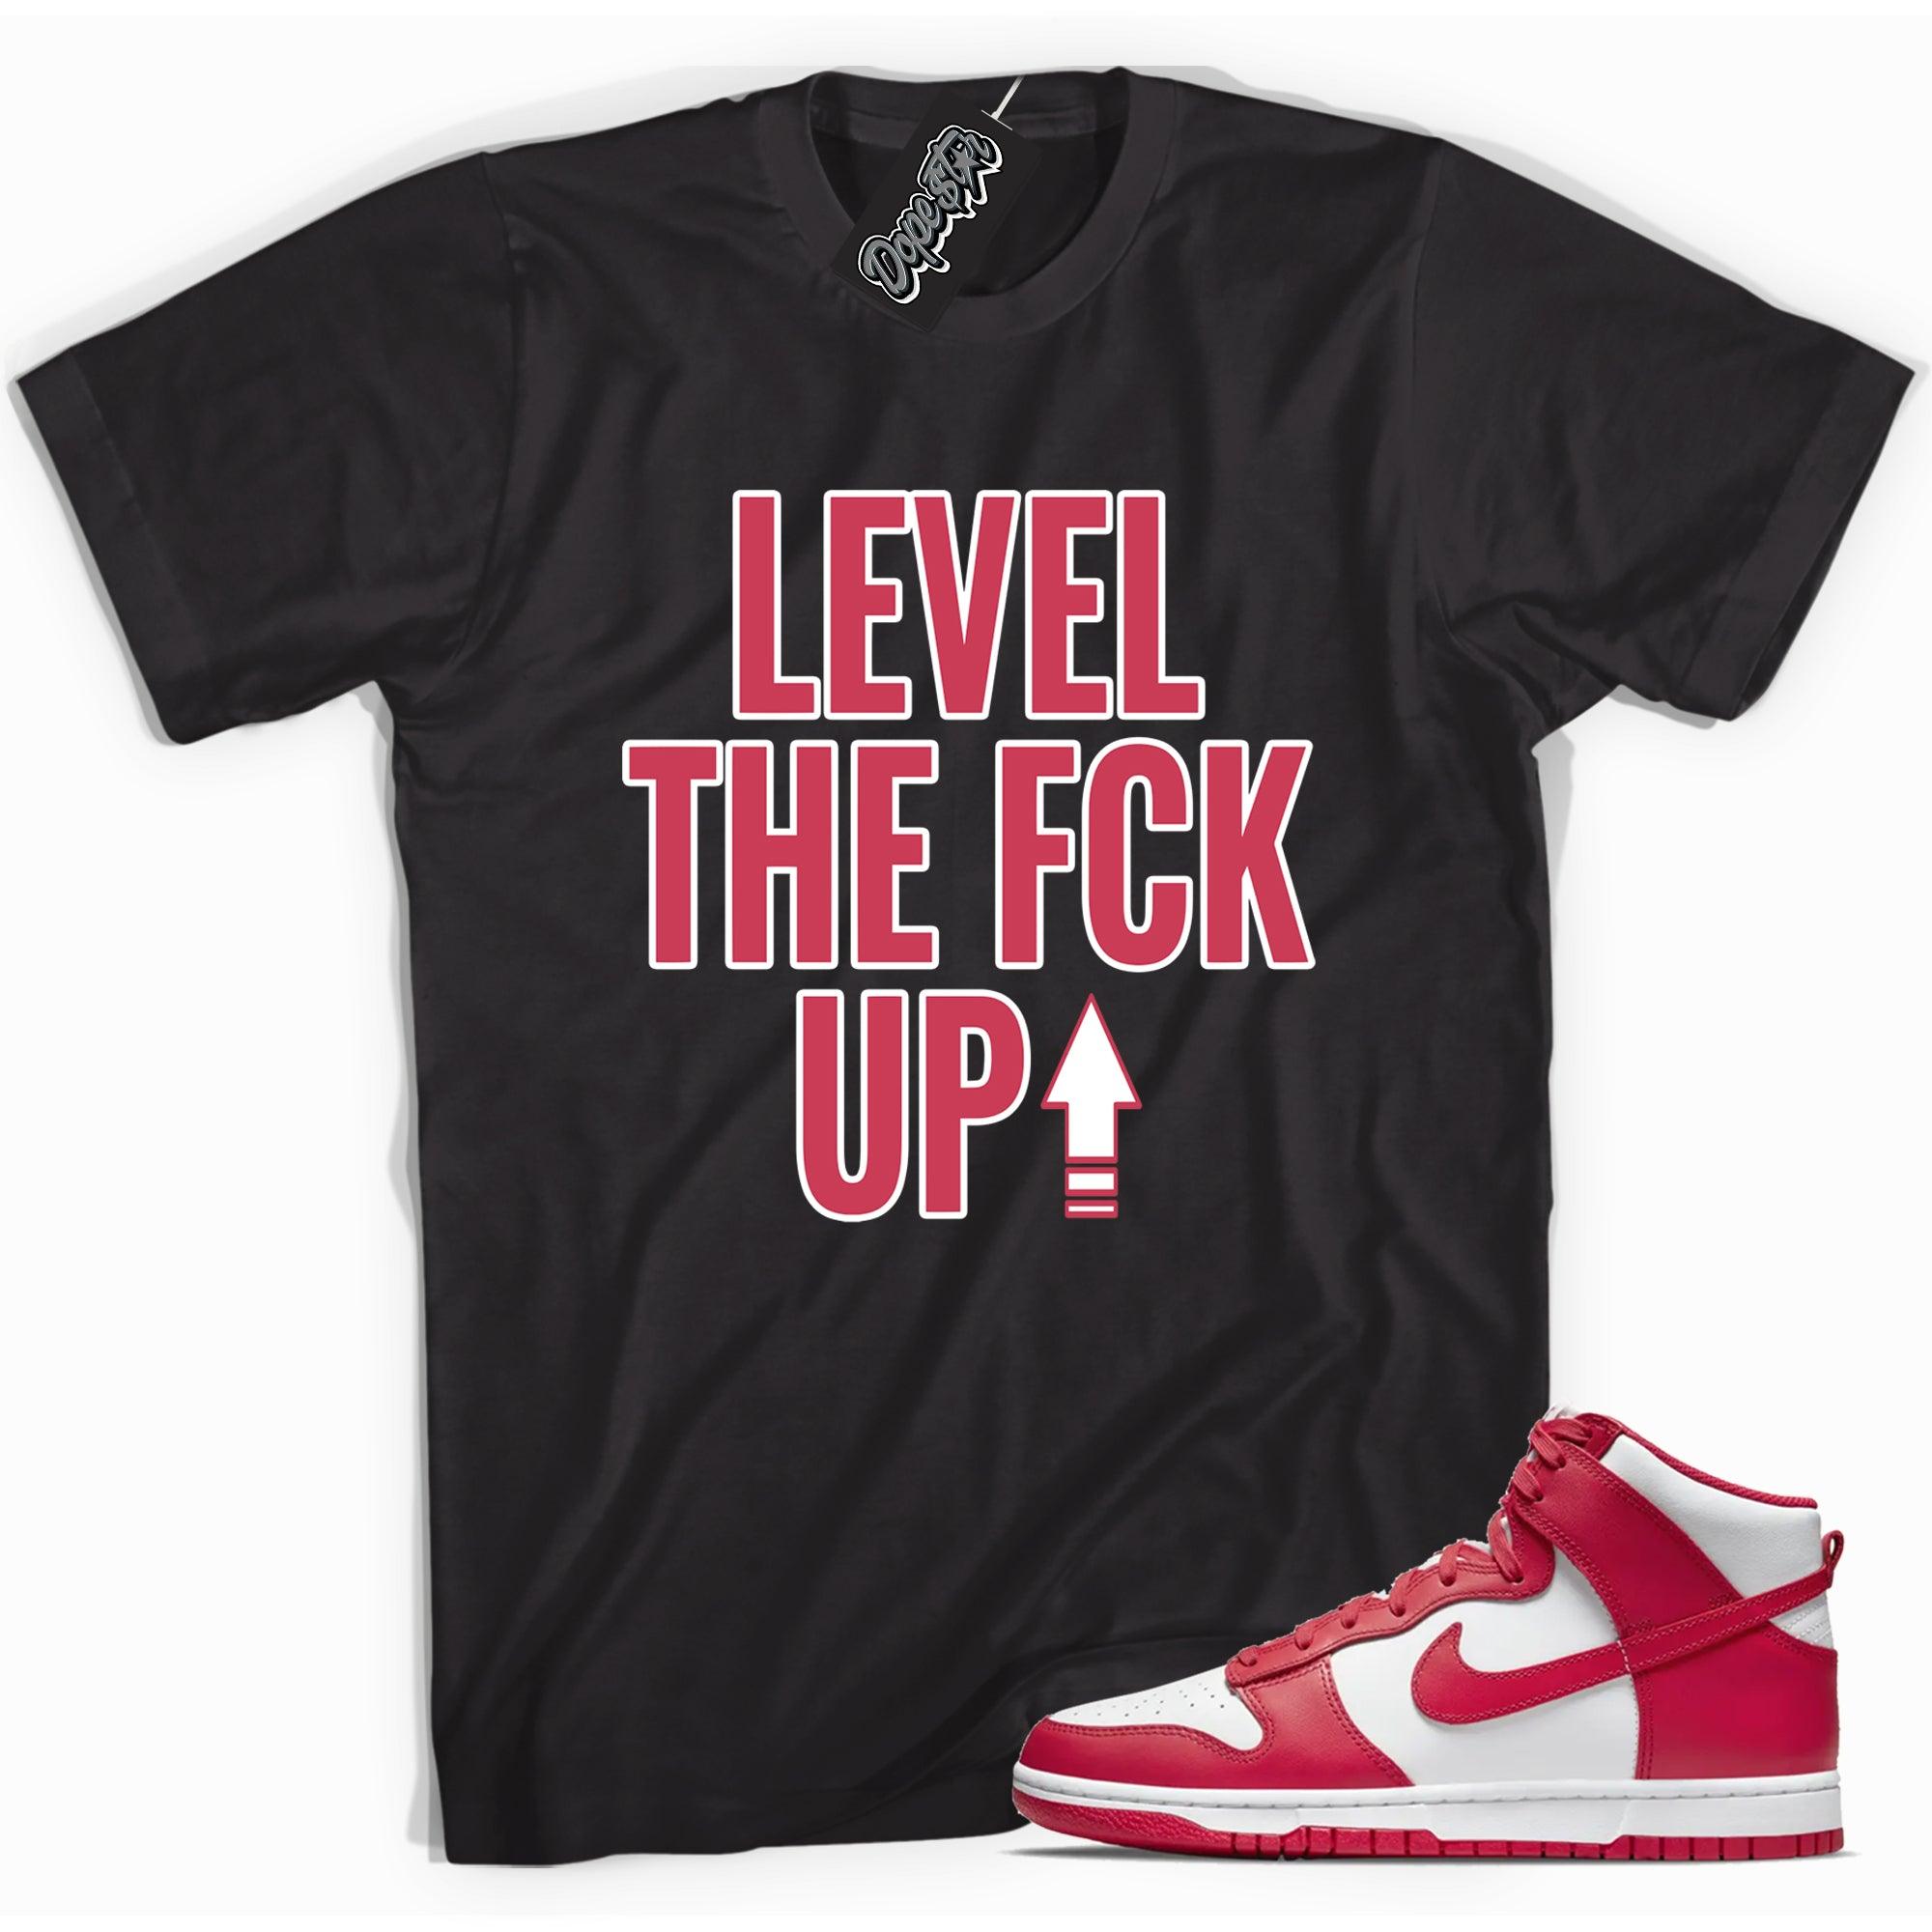 Cool black graphic tee with 'Level Up' print, that perfectly matches Nike Dunk High Championship White Red sneakers.